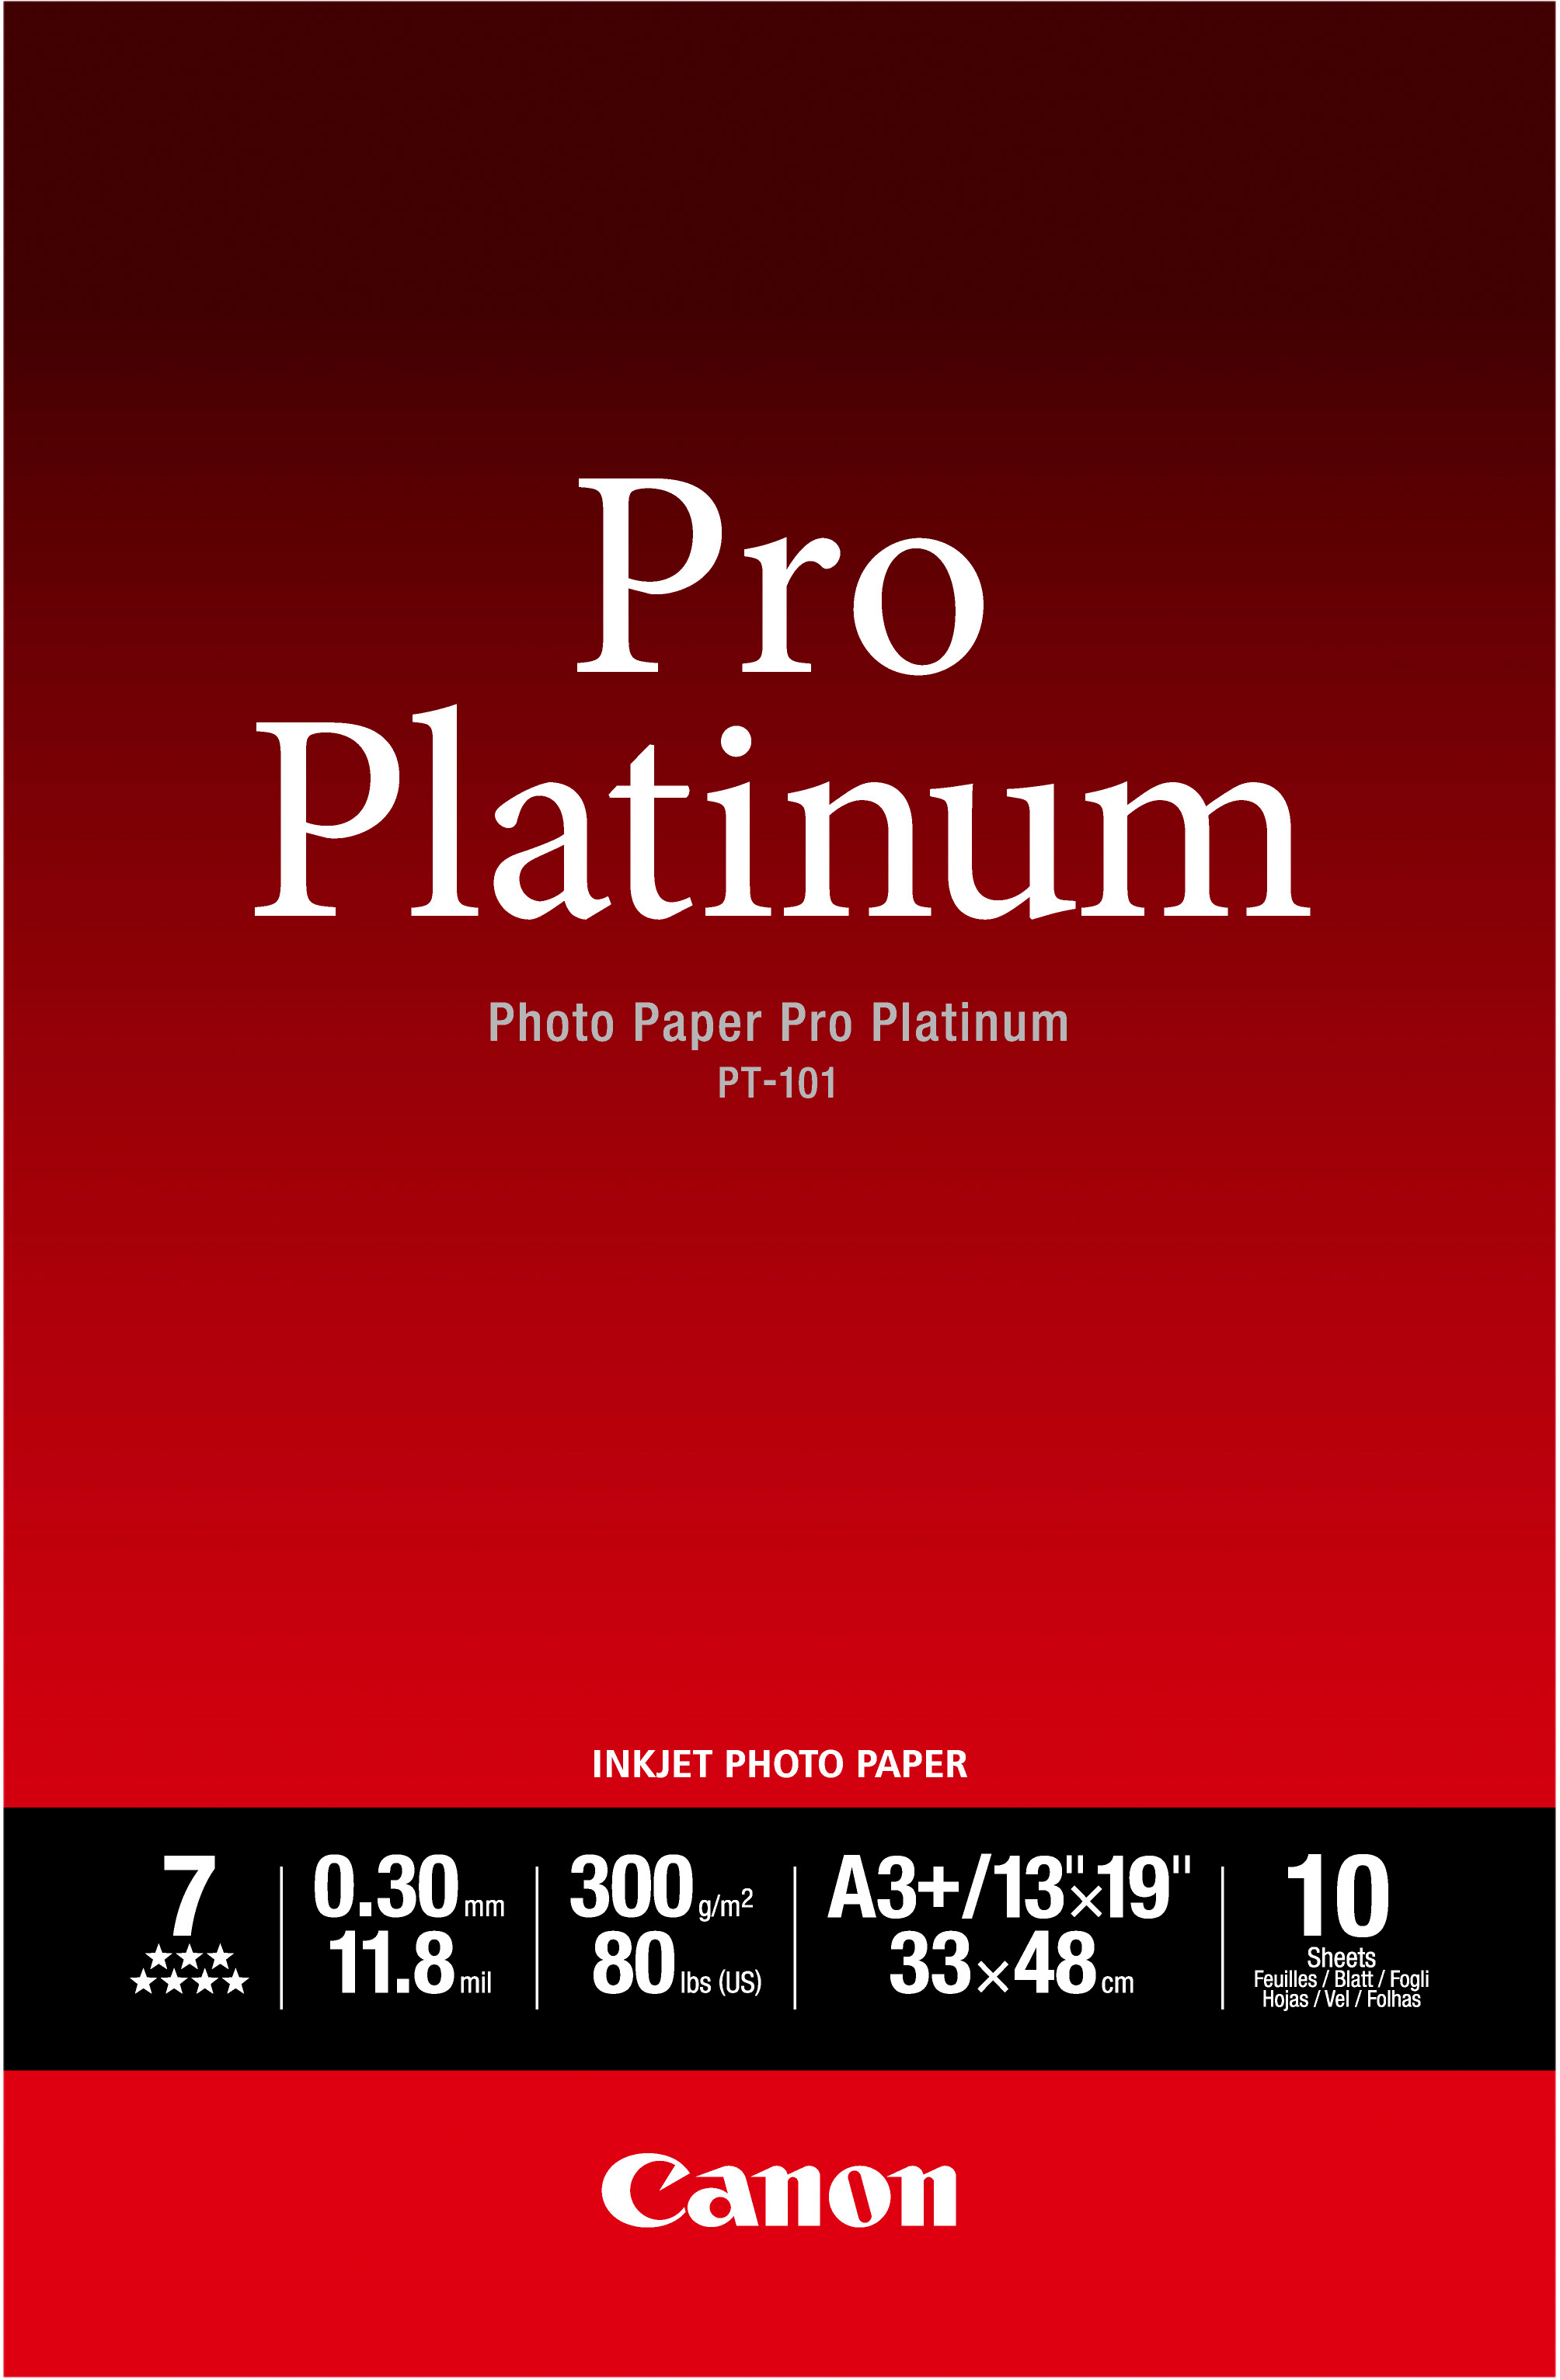 CANON Pro Platinum Photo Paper A3+ PT101A3+ InkJet glossy 300g 10 feuilles